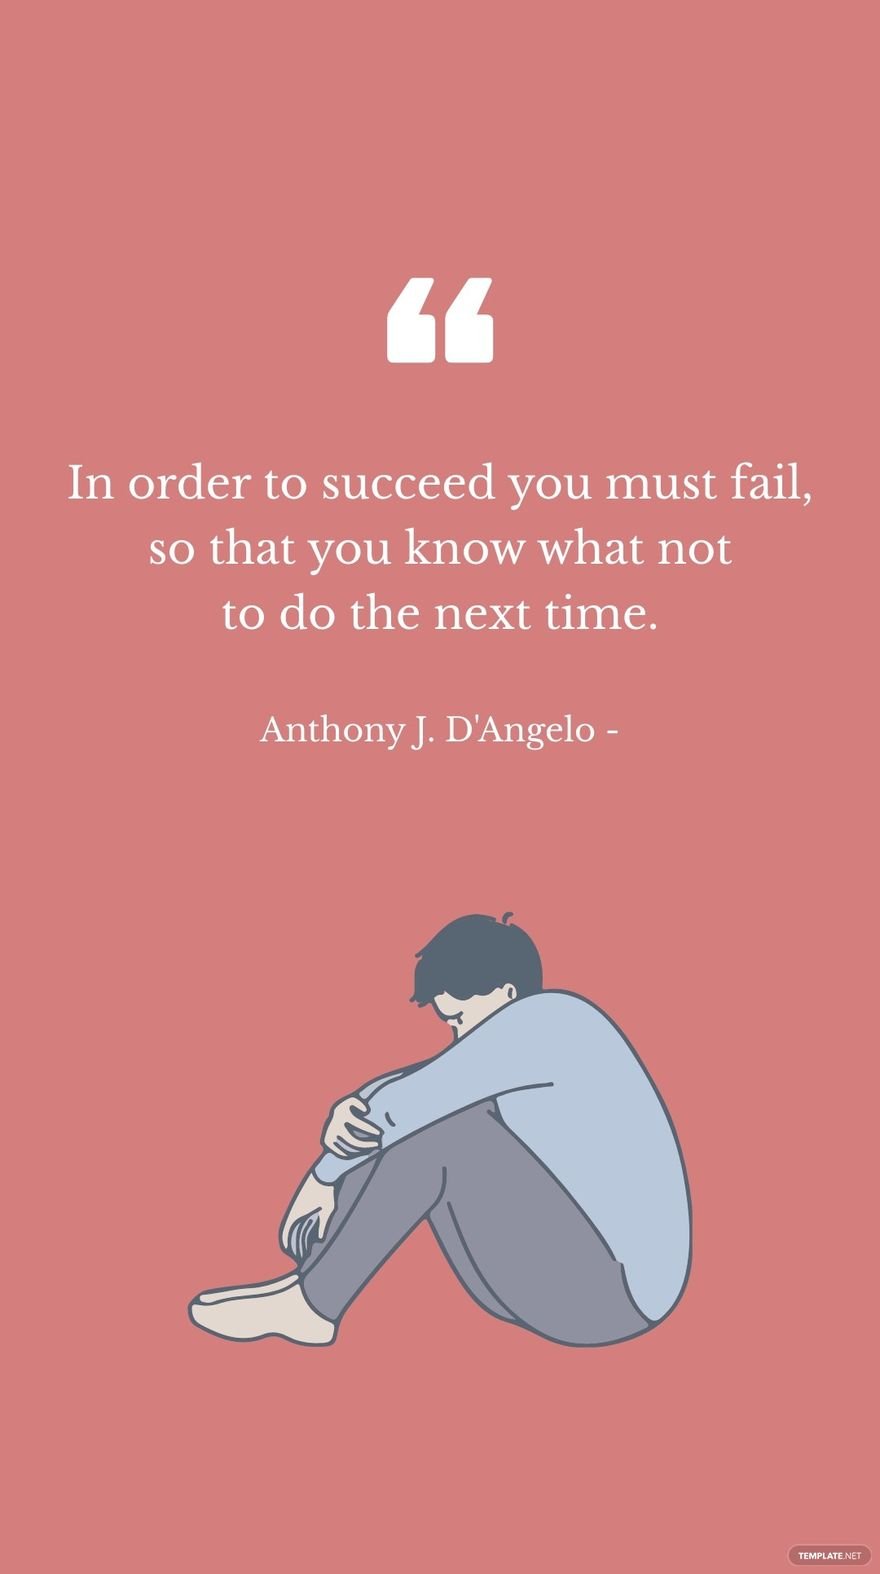 Anthony J. D'Angelo -  In order to succeed you must fail, so that you know what not to do the next time.